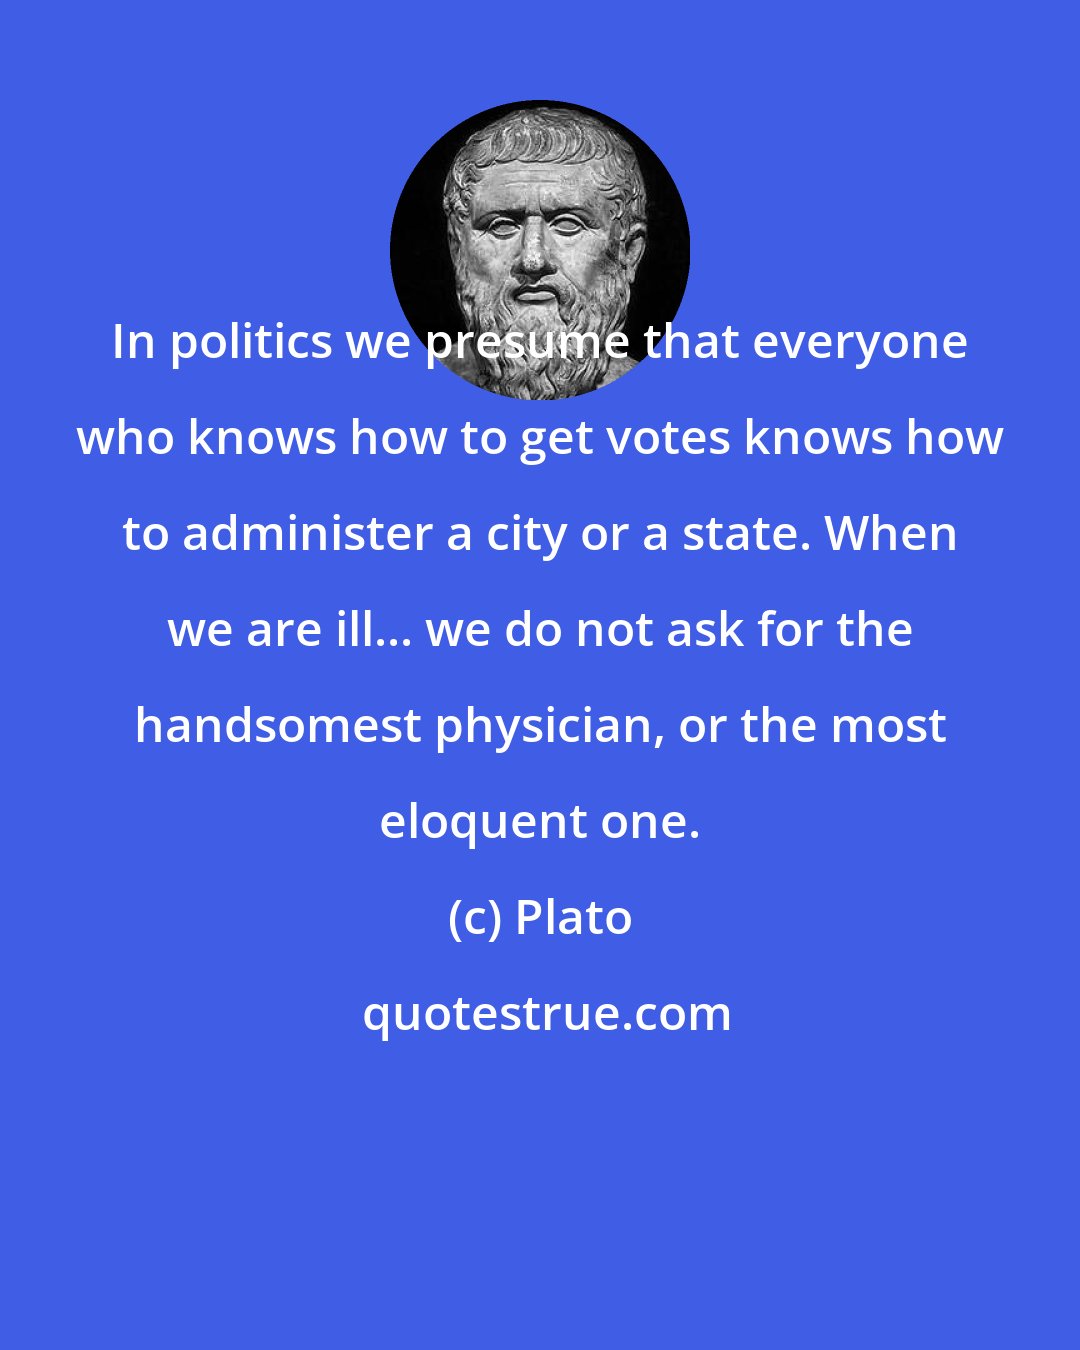 Plato: In politics we presume that everyone who knows how to get votes knows how to administer a city or a state. When we are ill... we do not ask for the handsomest physician, or the most eloquent one.